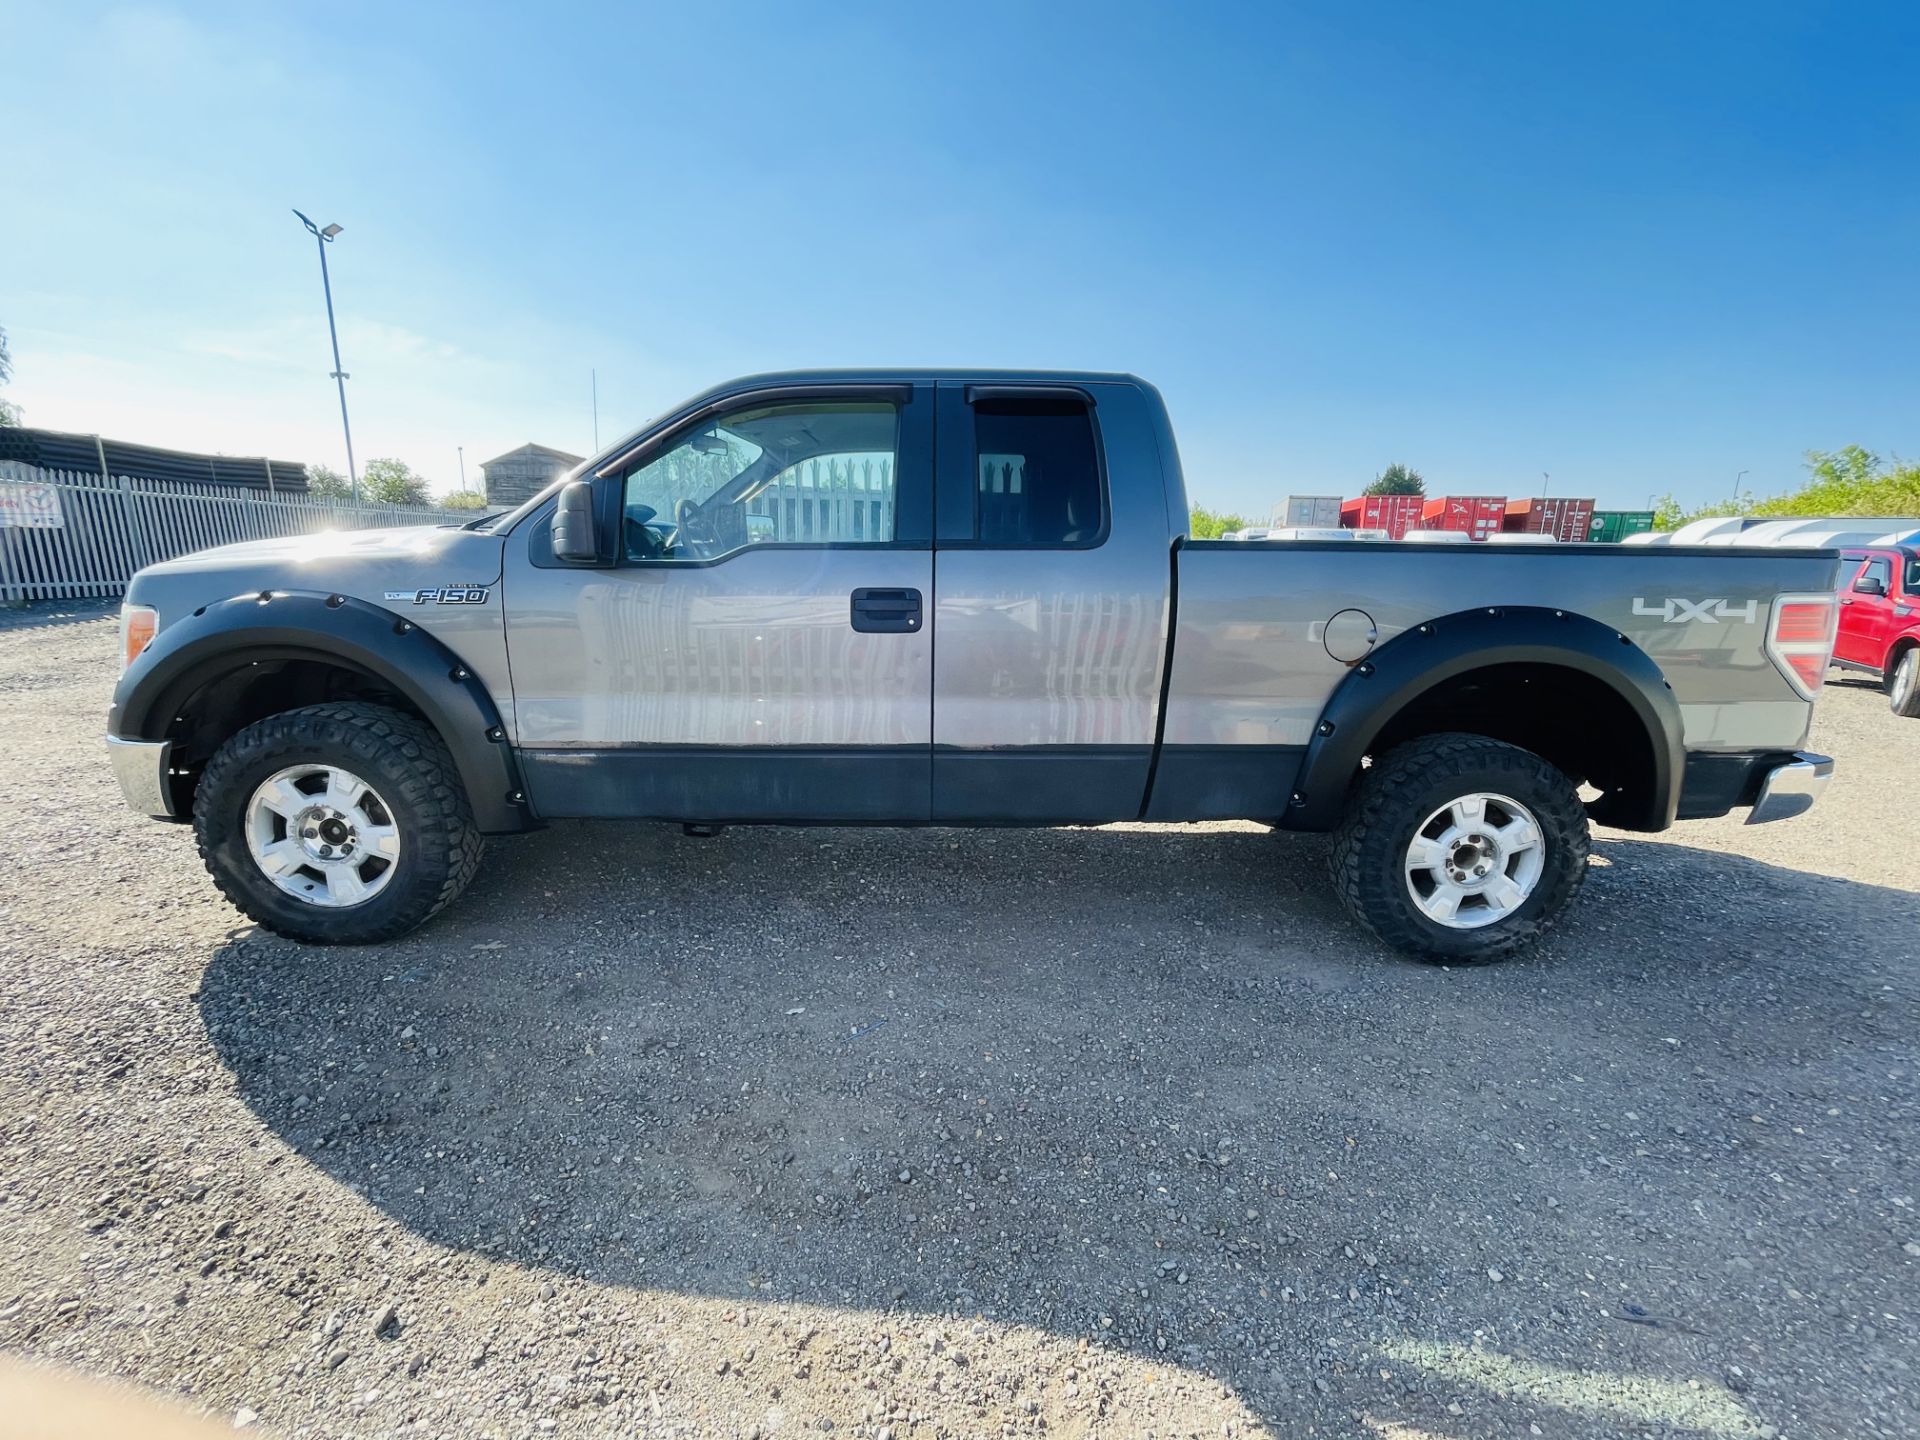 ** ON SALE **Ford F-150 4.6L V8 XLT Edition Super-Cab 4x4 '2010 Year' Air Con - 6 seats- Pick Up - Image 5 of 19